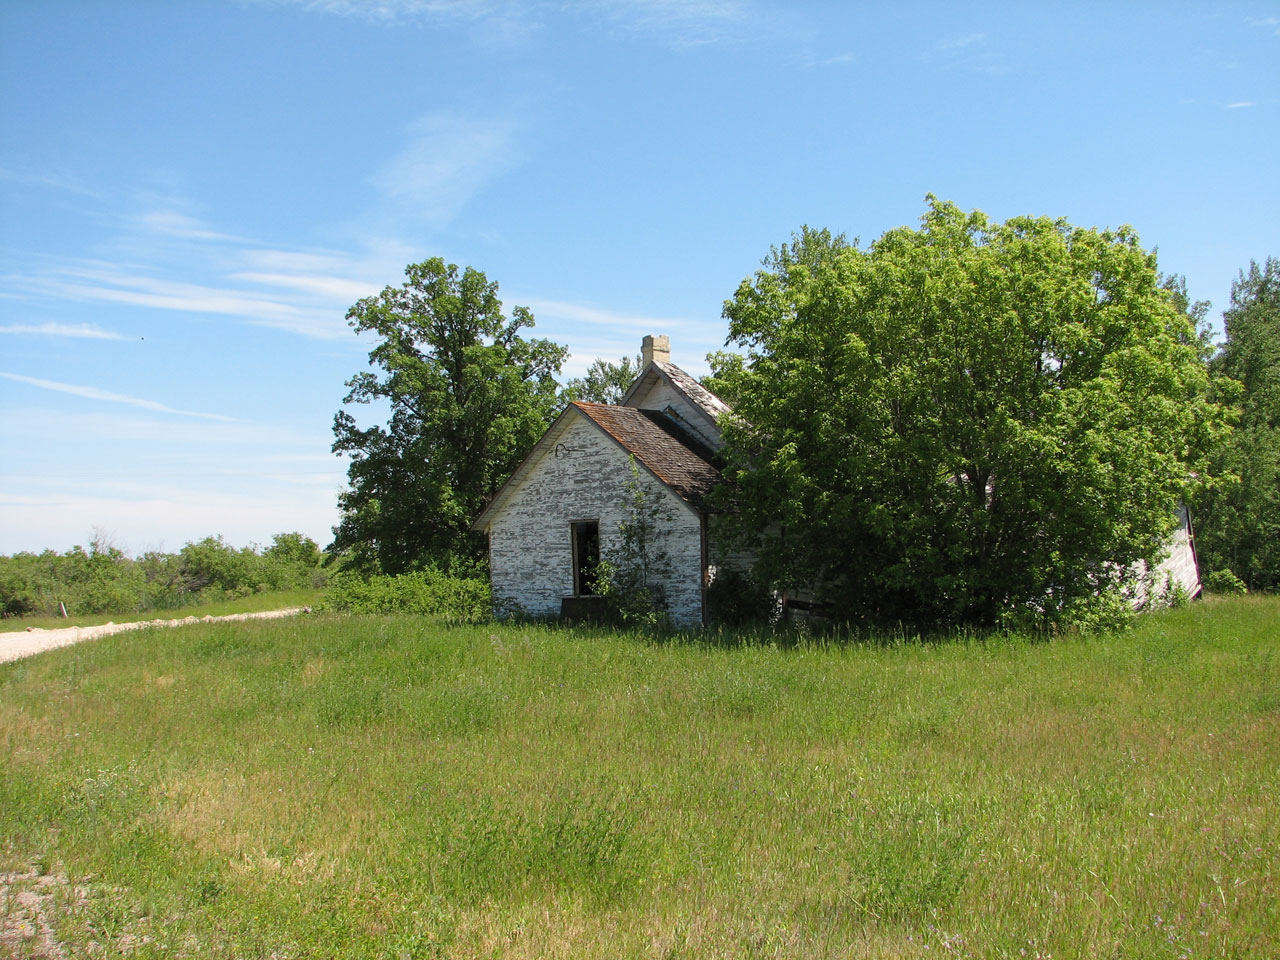 Old country farm building with blue sky and green fields